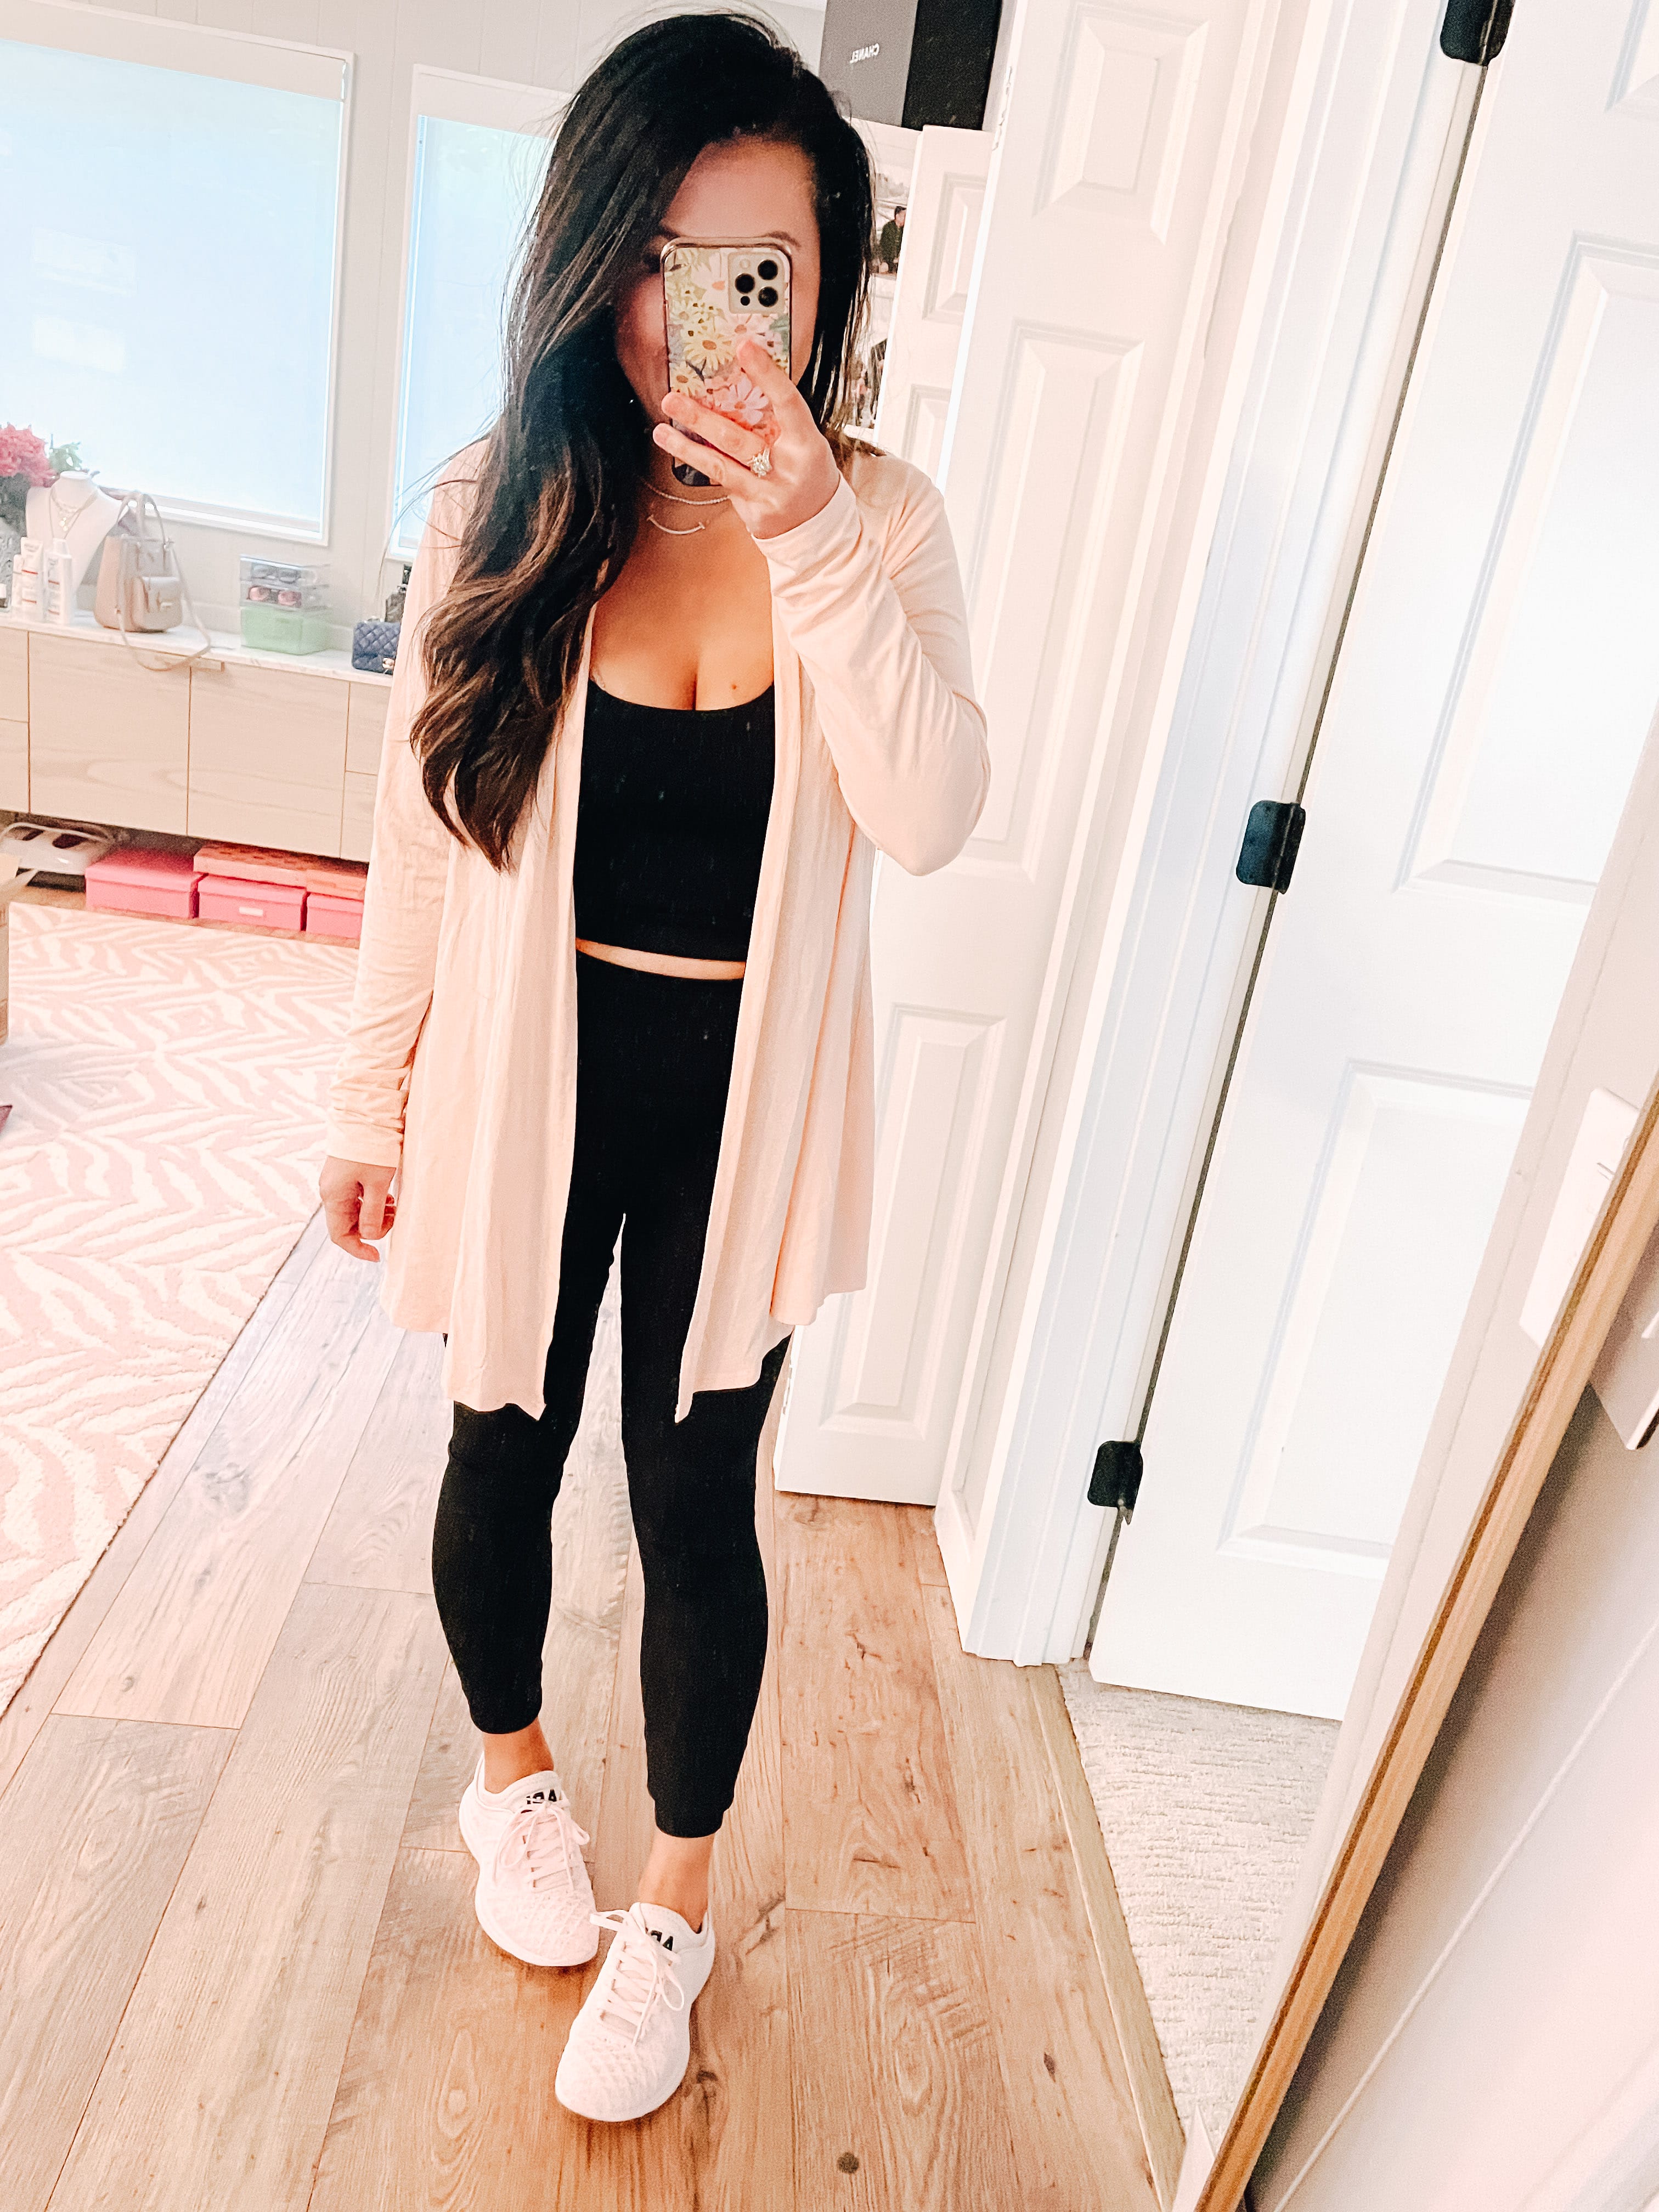 Pin by Tootie🍭 on FIT. | Outfits with leggings, Fasion outfits, Pretty  girl outfits